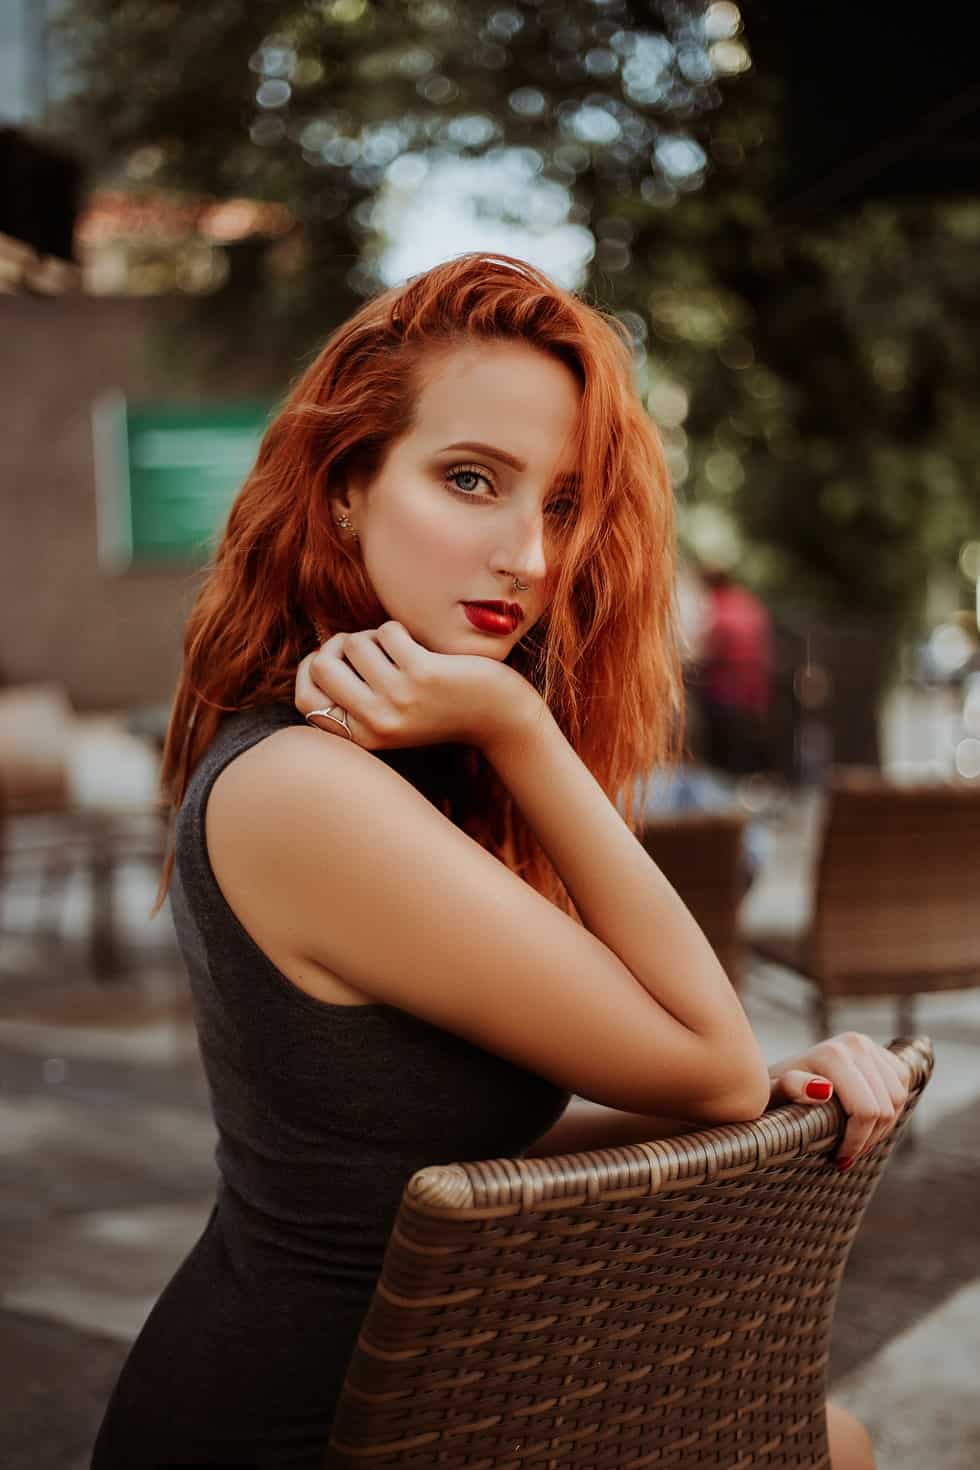 woman with red hair posing on chair